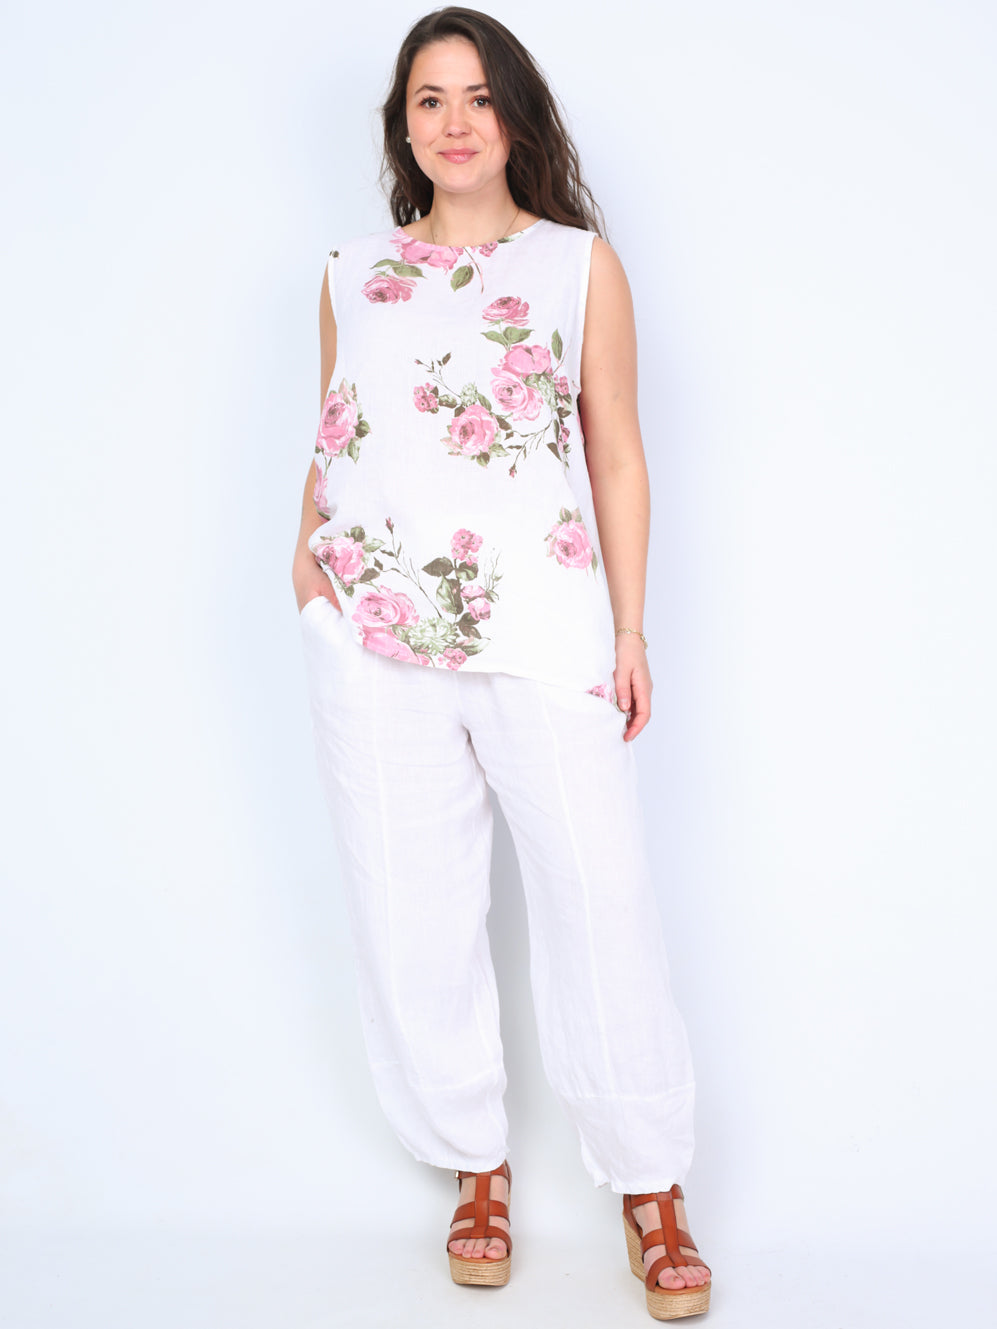 Krone 1 linen top with floral print